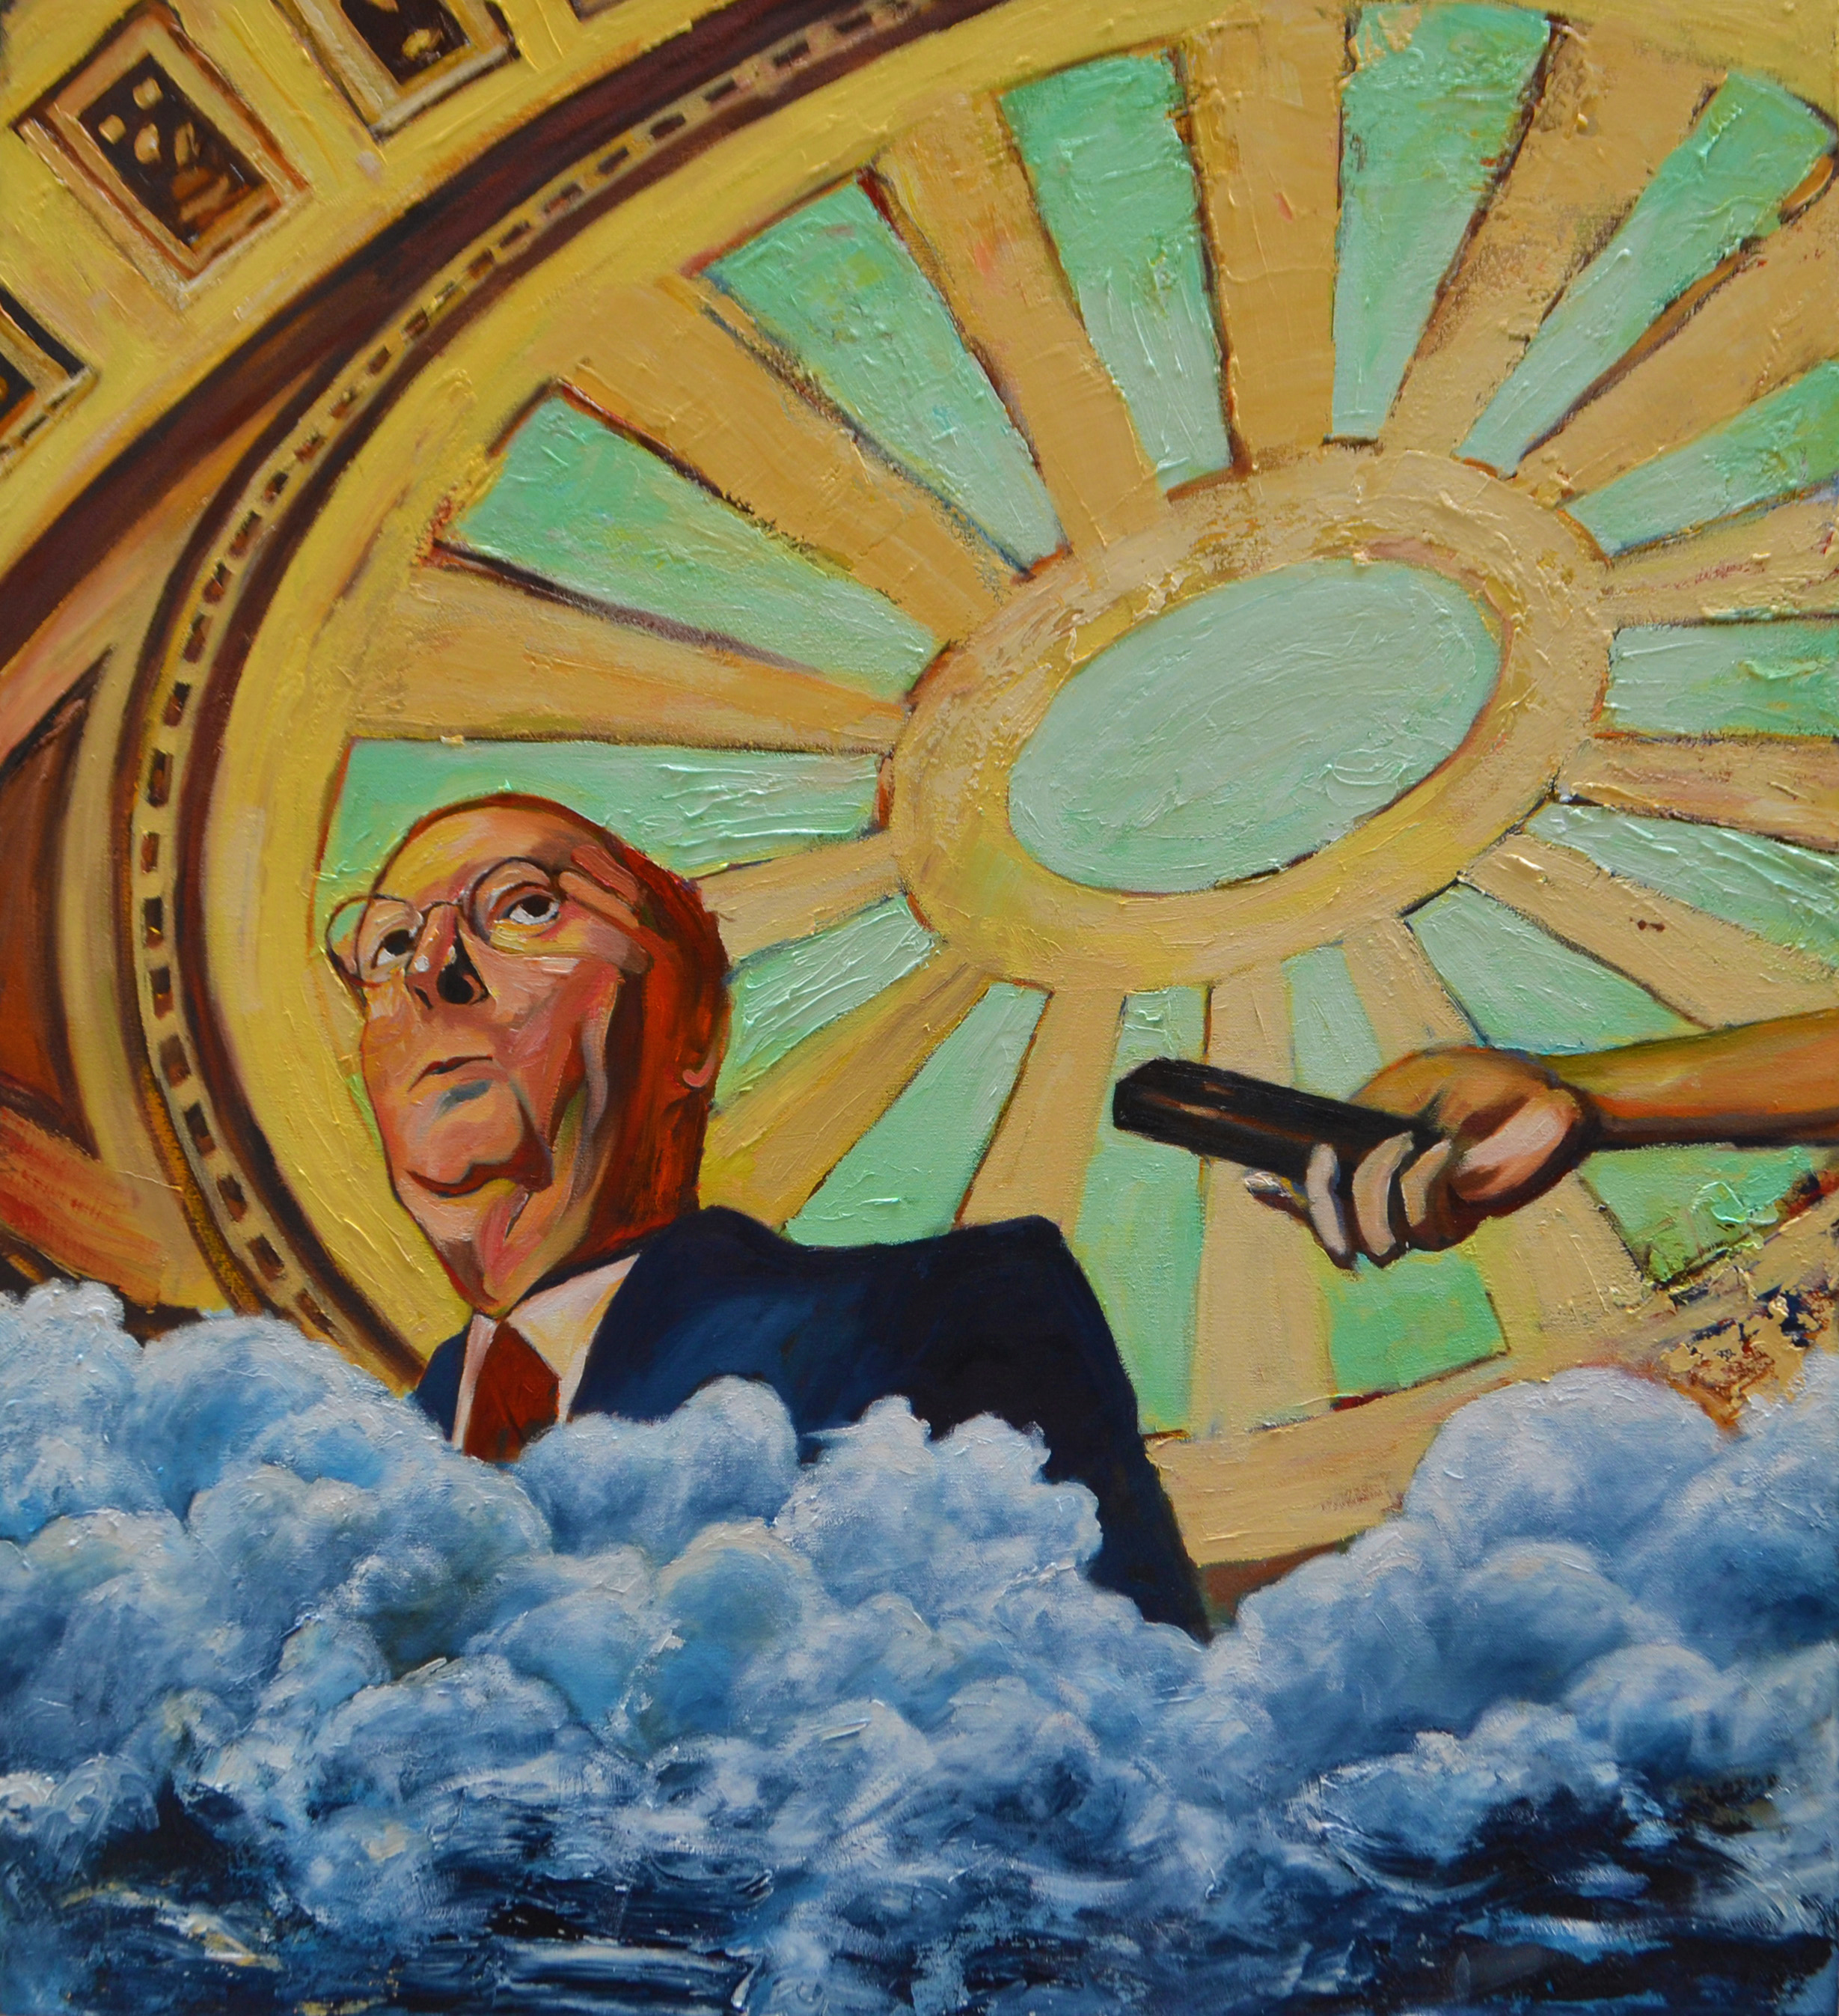   The Apotheosis of Mitch McConnell  2018 oil on canvas 44 x 40” 